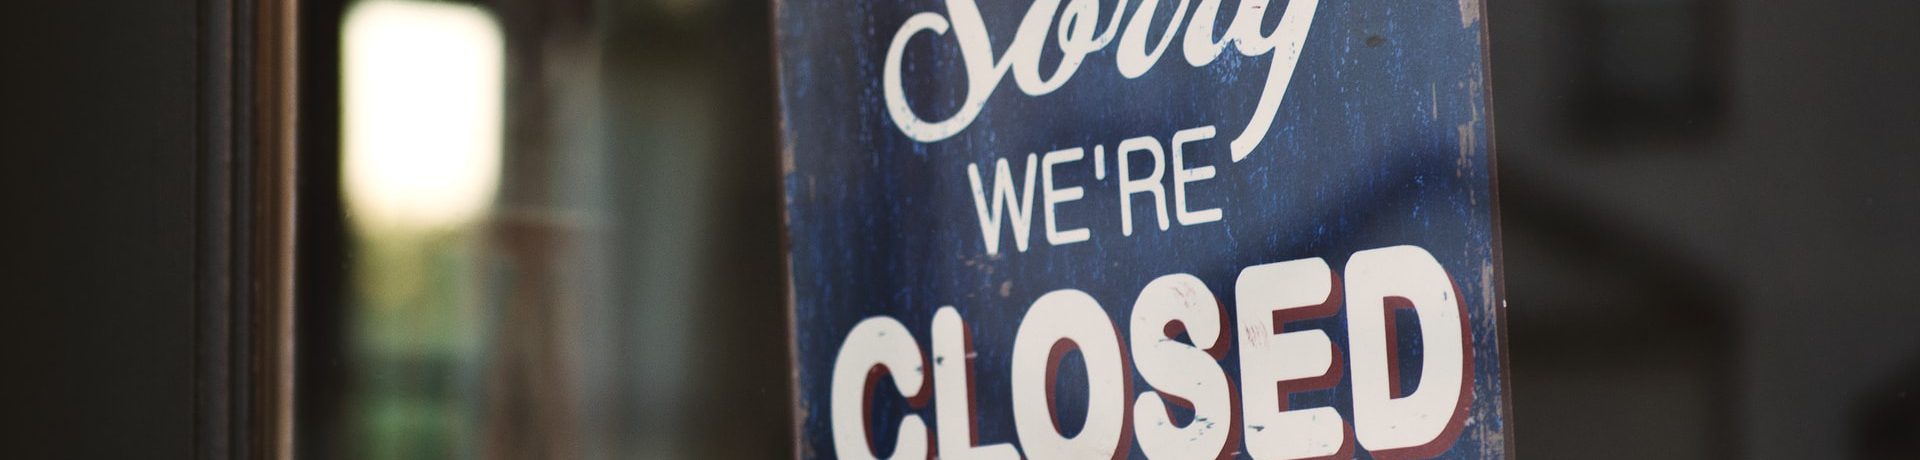 A sign reading "Sorry, We're Closed" in a business window